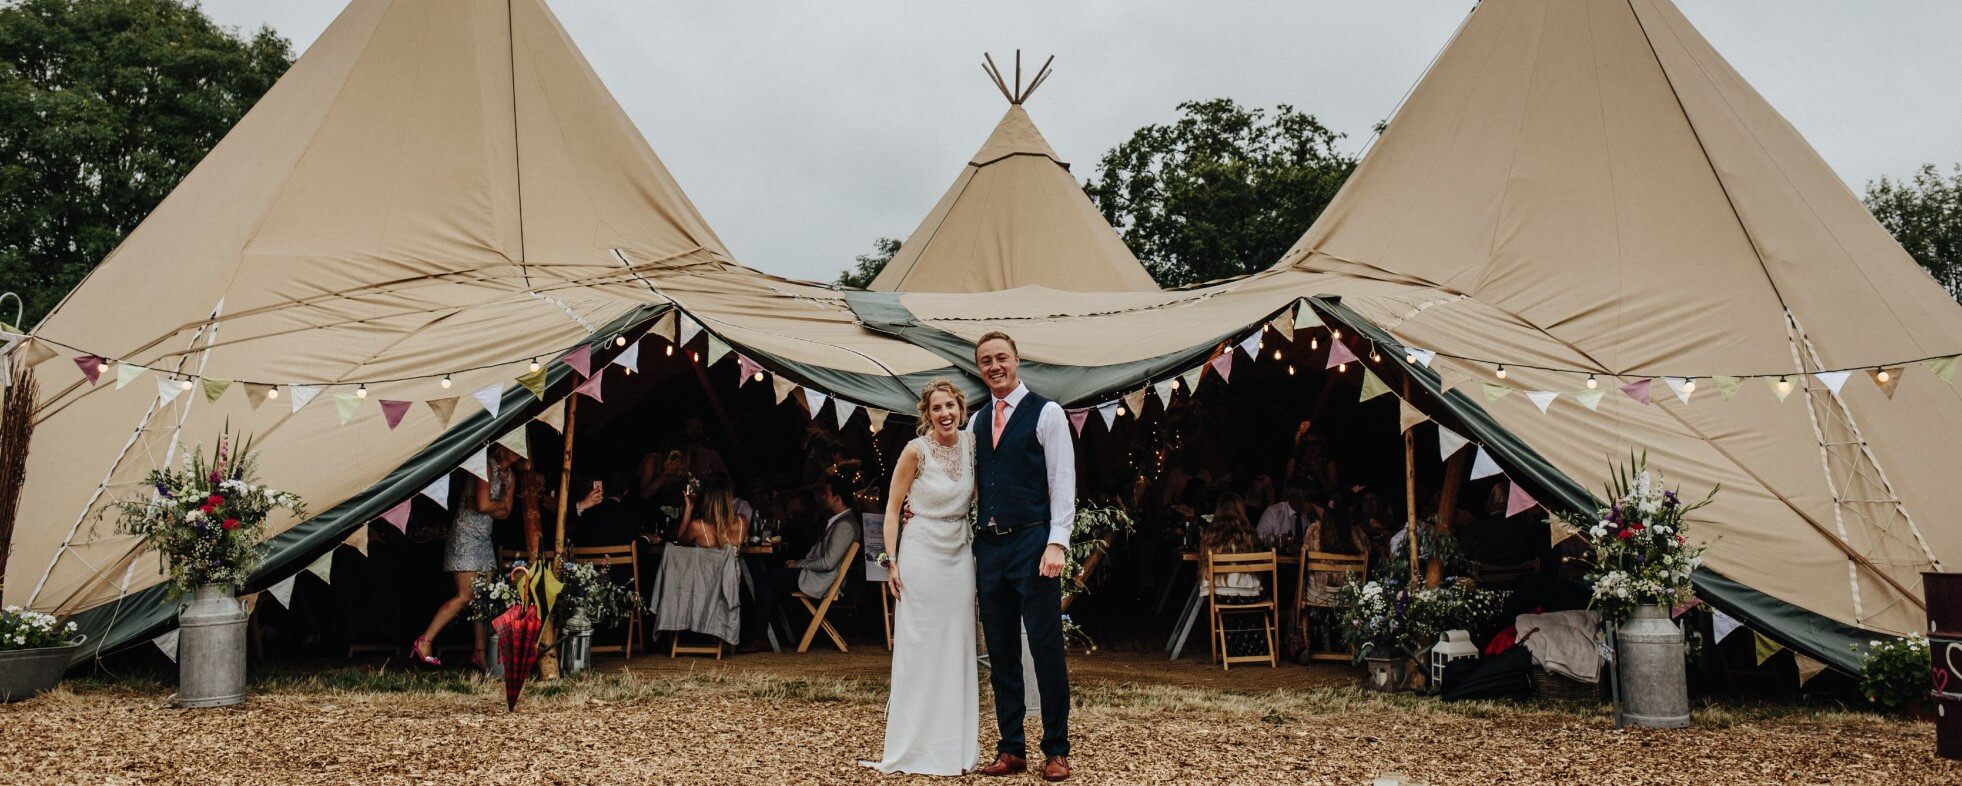 Wedding couple standing at the front of a three peaked festival tent